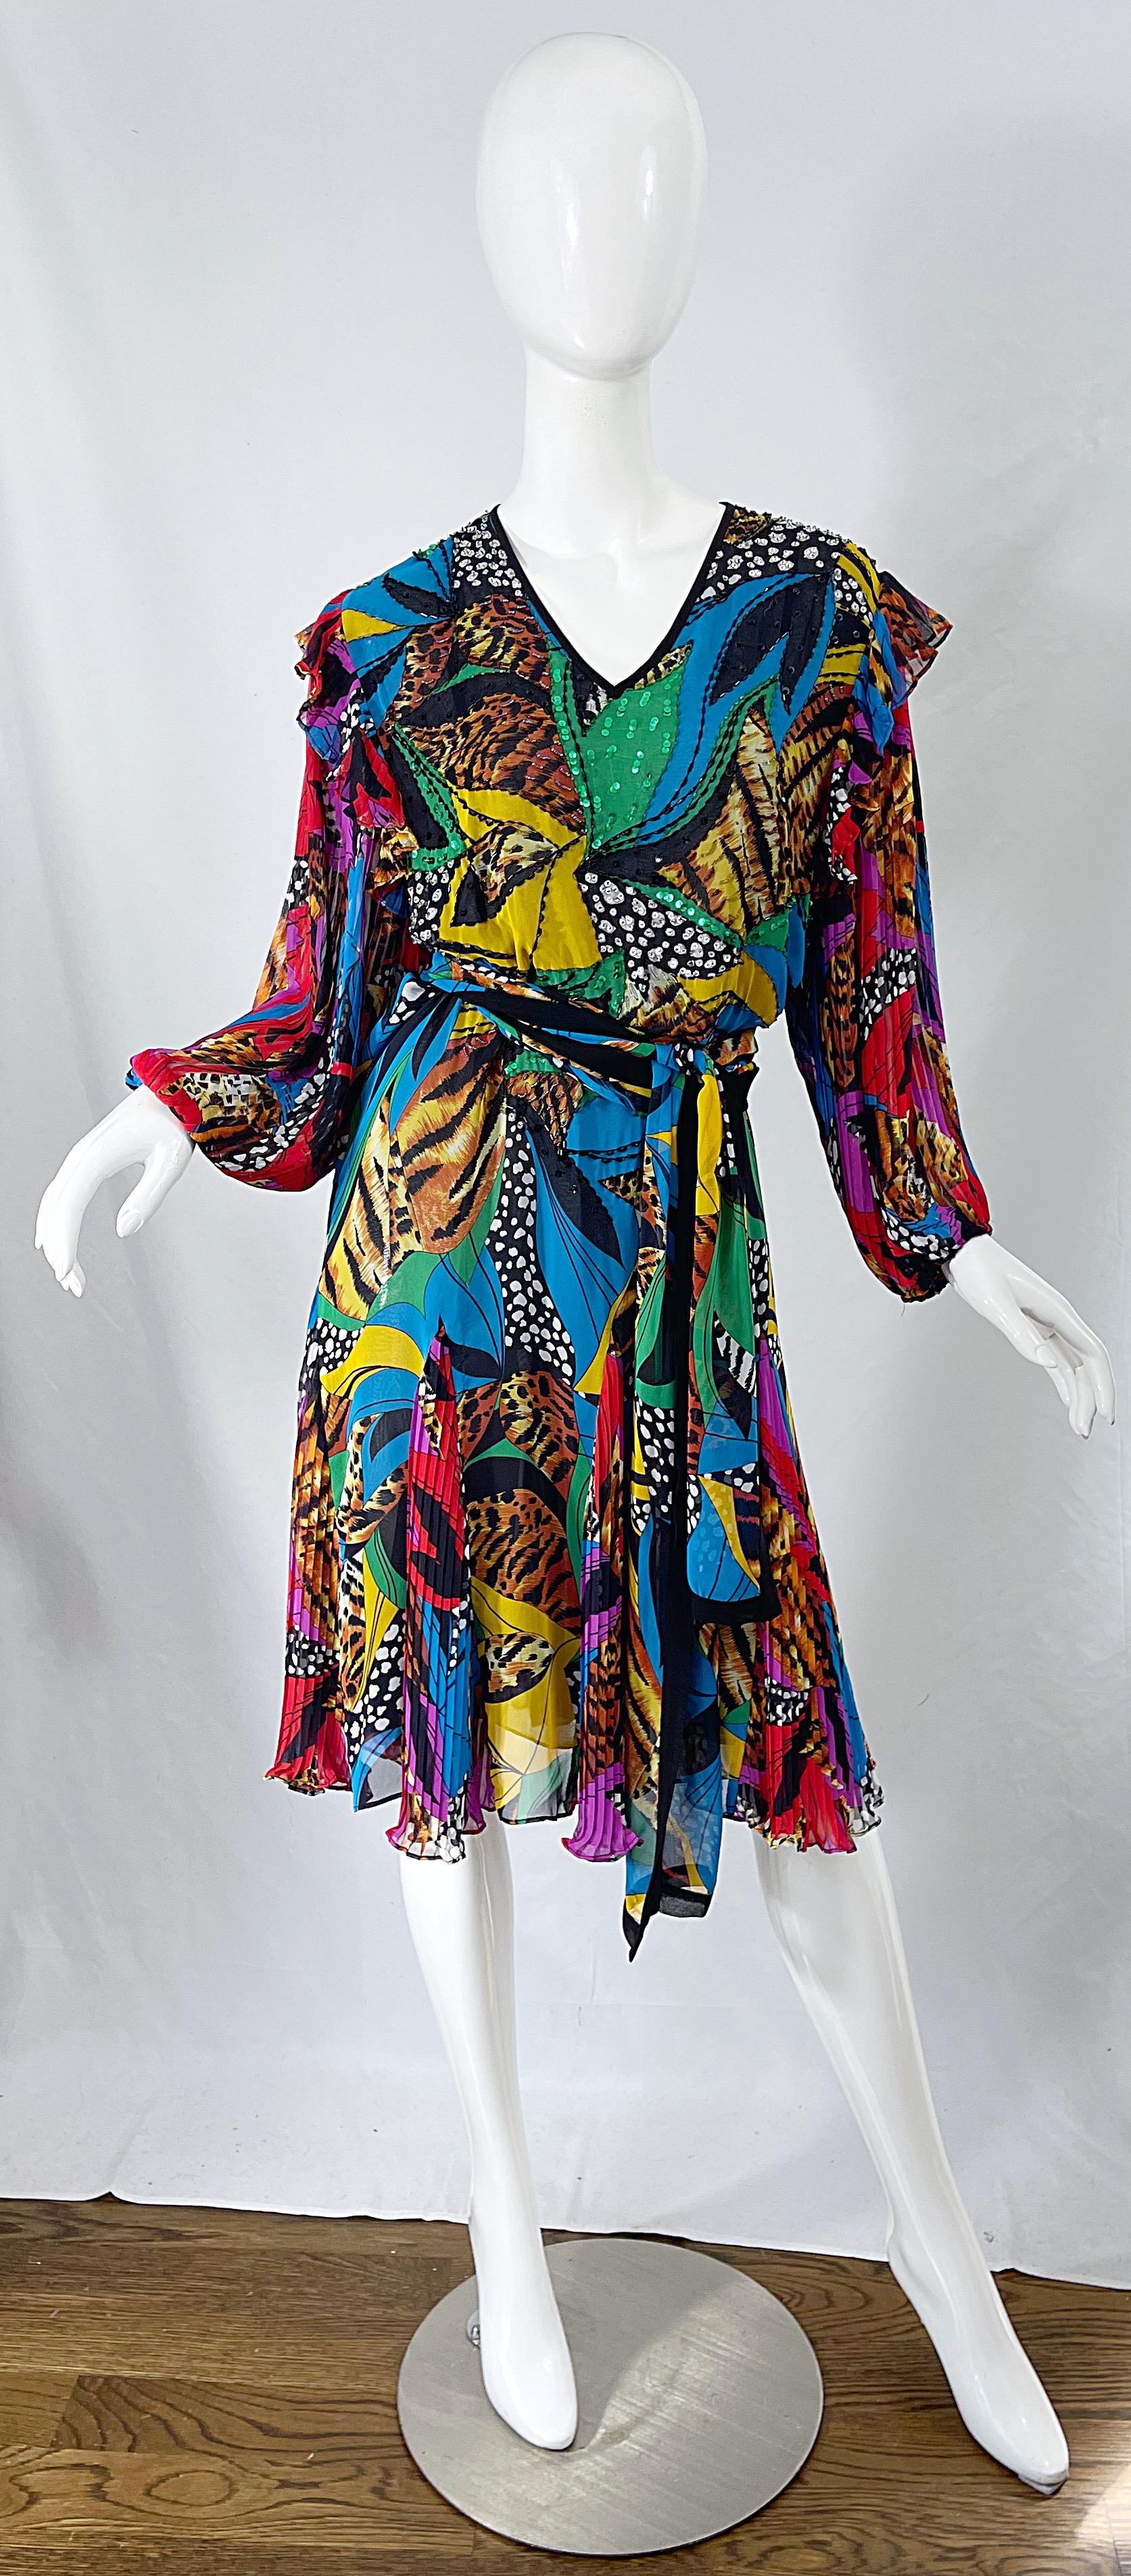 Fabulous mid 1980s DIANE FREIS beaded and sequin abstract and animal print chiffon dress ! Features a blouson style bodice with vibrant colors of green, blue, purple, black, white, yellow, red, and tan. Ruffle details at each shoulder. Simply slips